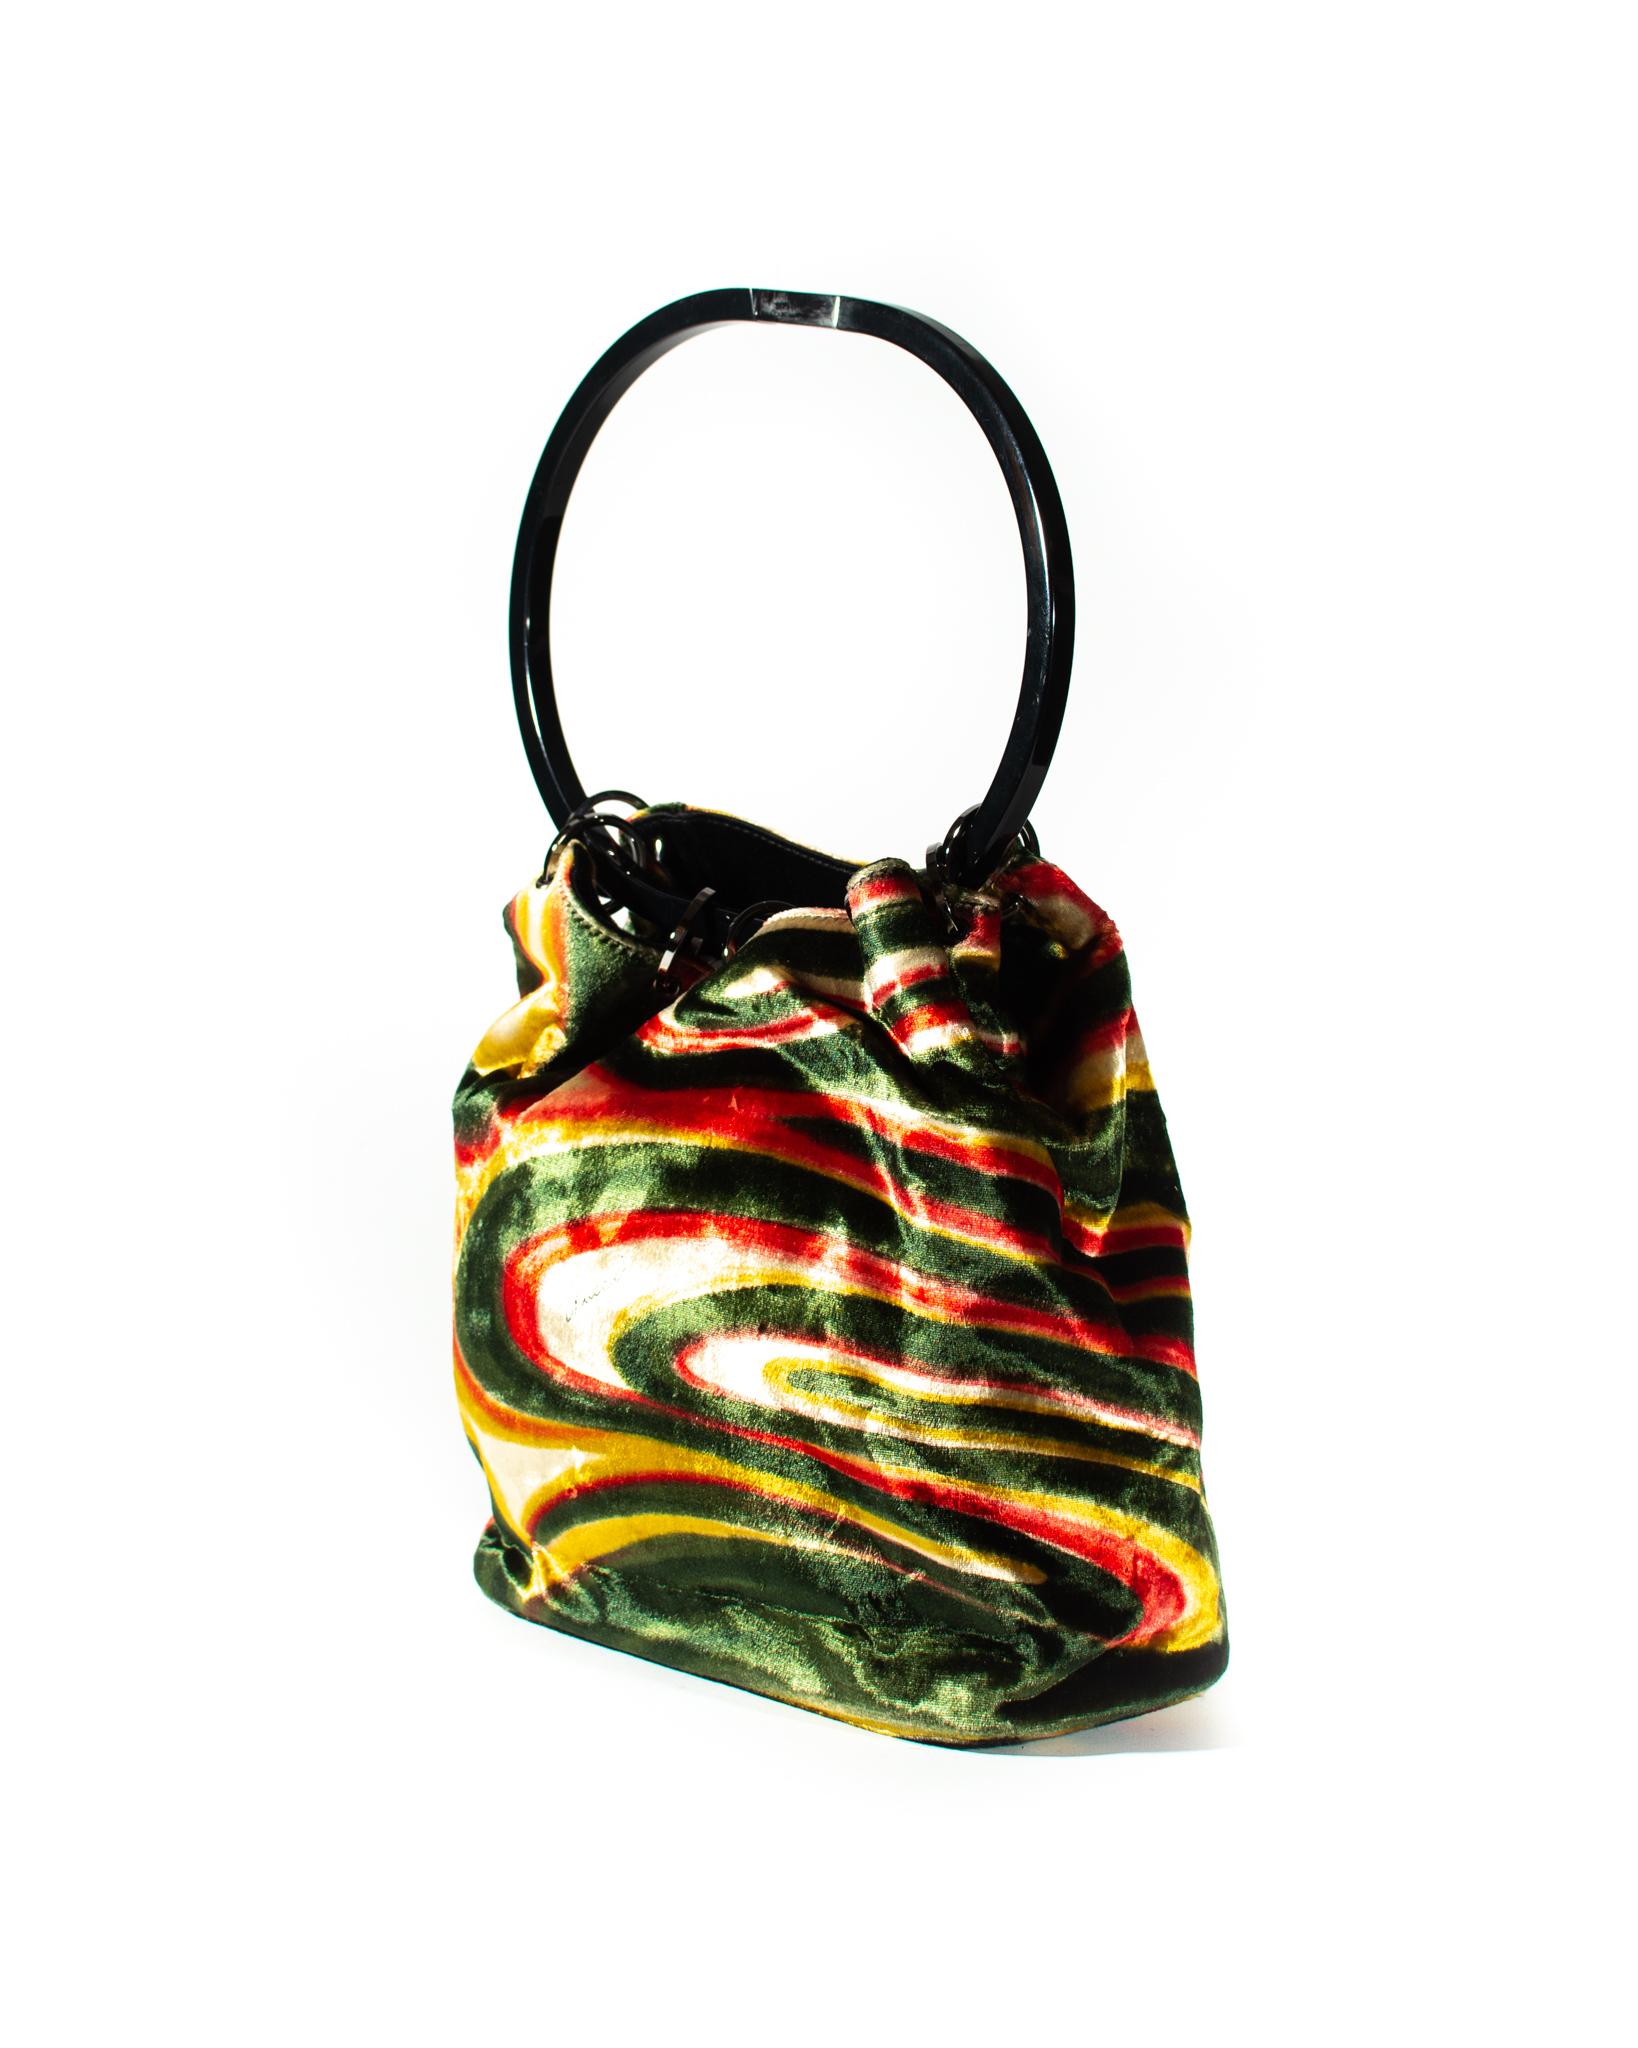 Presenting  From the Gucci F/W 1999 collection designed by Tom Ford, this gorgeous lucite hoop, bucket bag features Tom Ford's memorable psychedelic pattern in silk velvet. The same pattern is seen on the runway on other pieces in this collection.